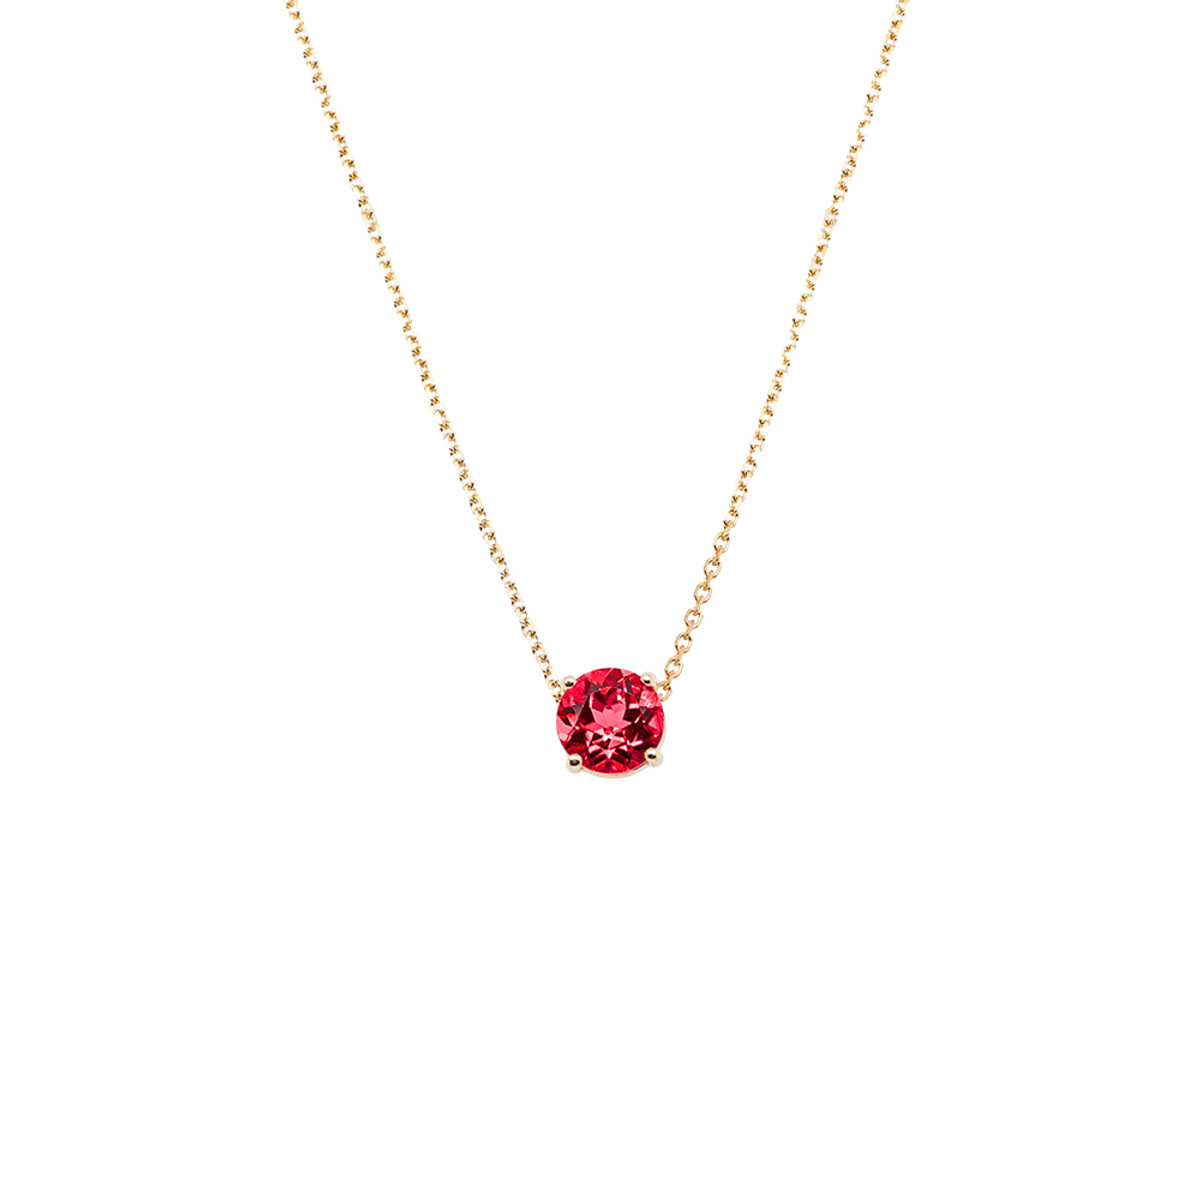 Hyde Park 14K Yellow Gold Solitaire Ruby Pendant-23473